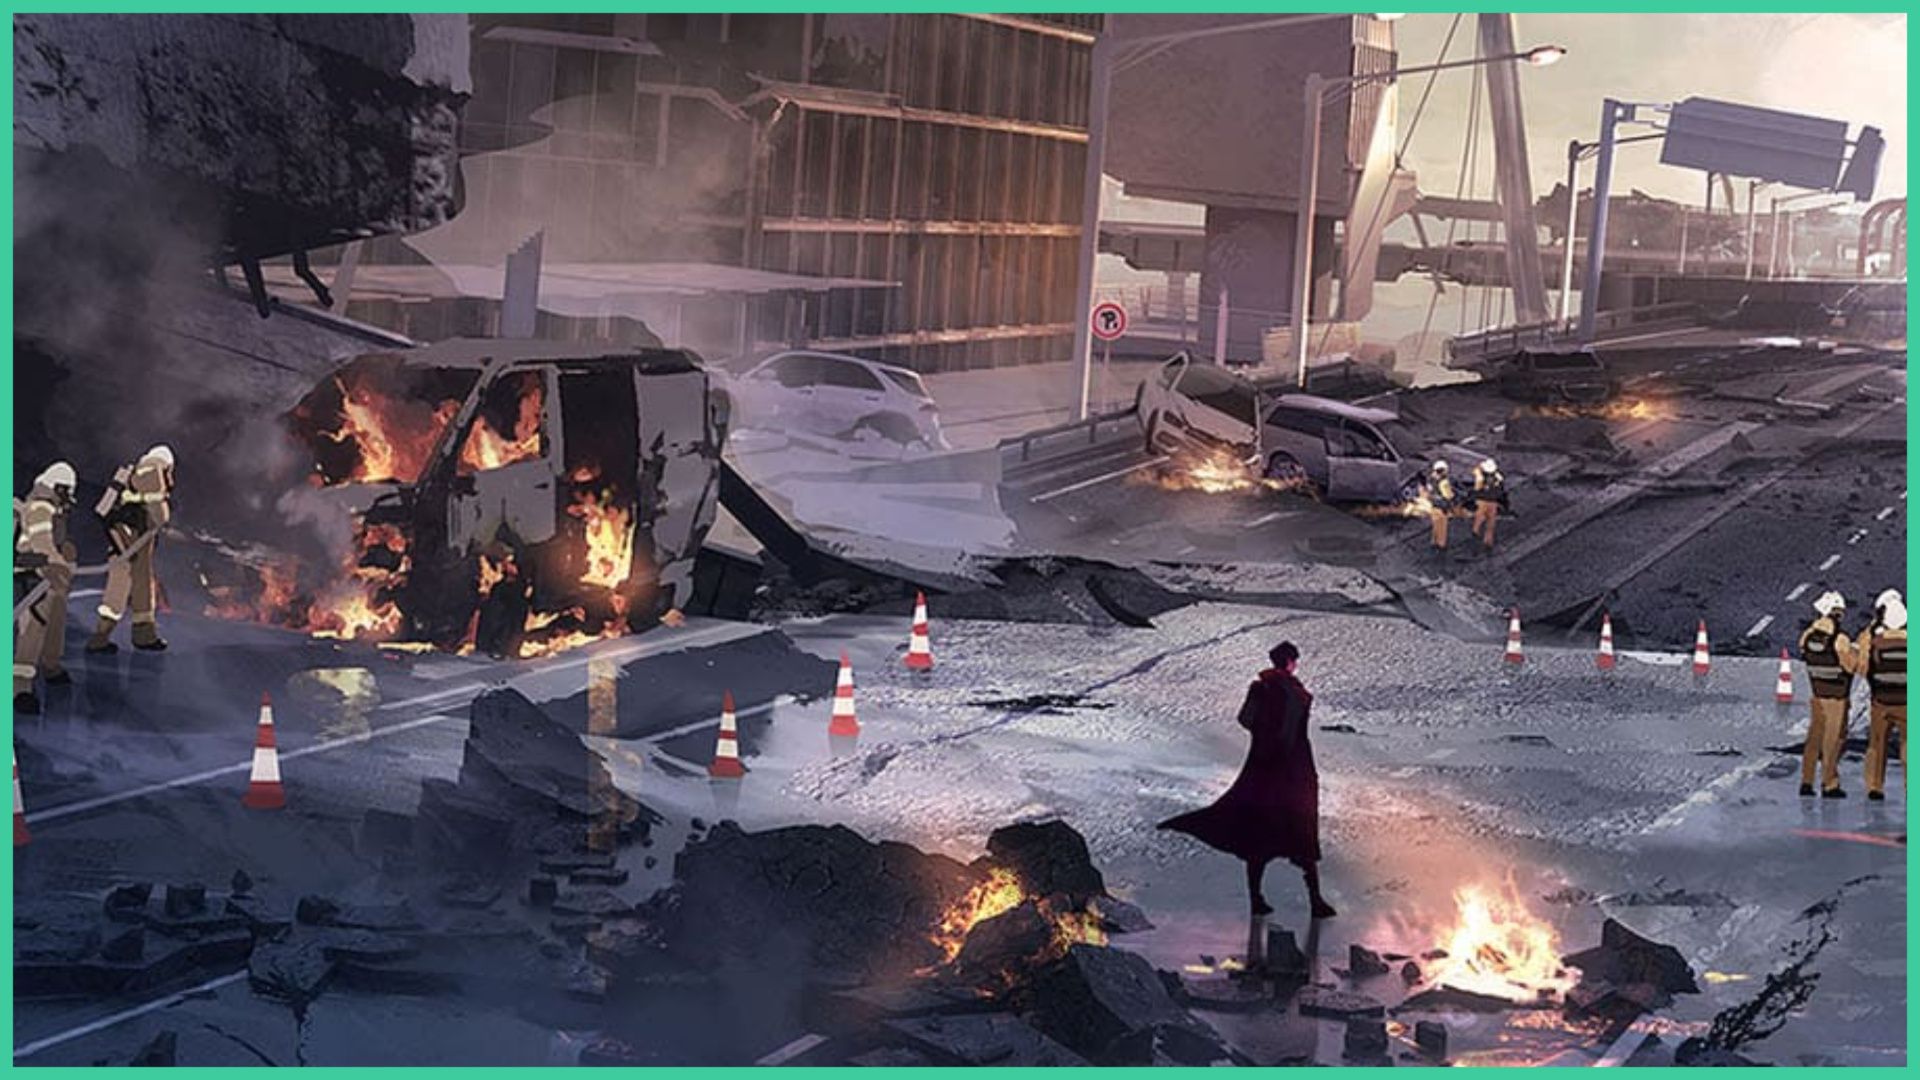 feature image for our solo leveling arise reroll guide, the image is a piece of promo art of sung jin-woo walking across a destroyed city as his coat blows in the wind, there is debris on fire on the ground, a car set alight as firemen try to extinguish the flames, large cracks in the road with abandoned cars, orange traffic cones on the road, and other emergency service staff surveying the area